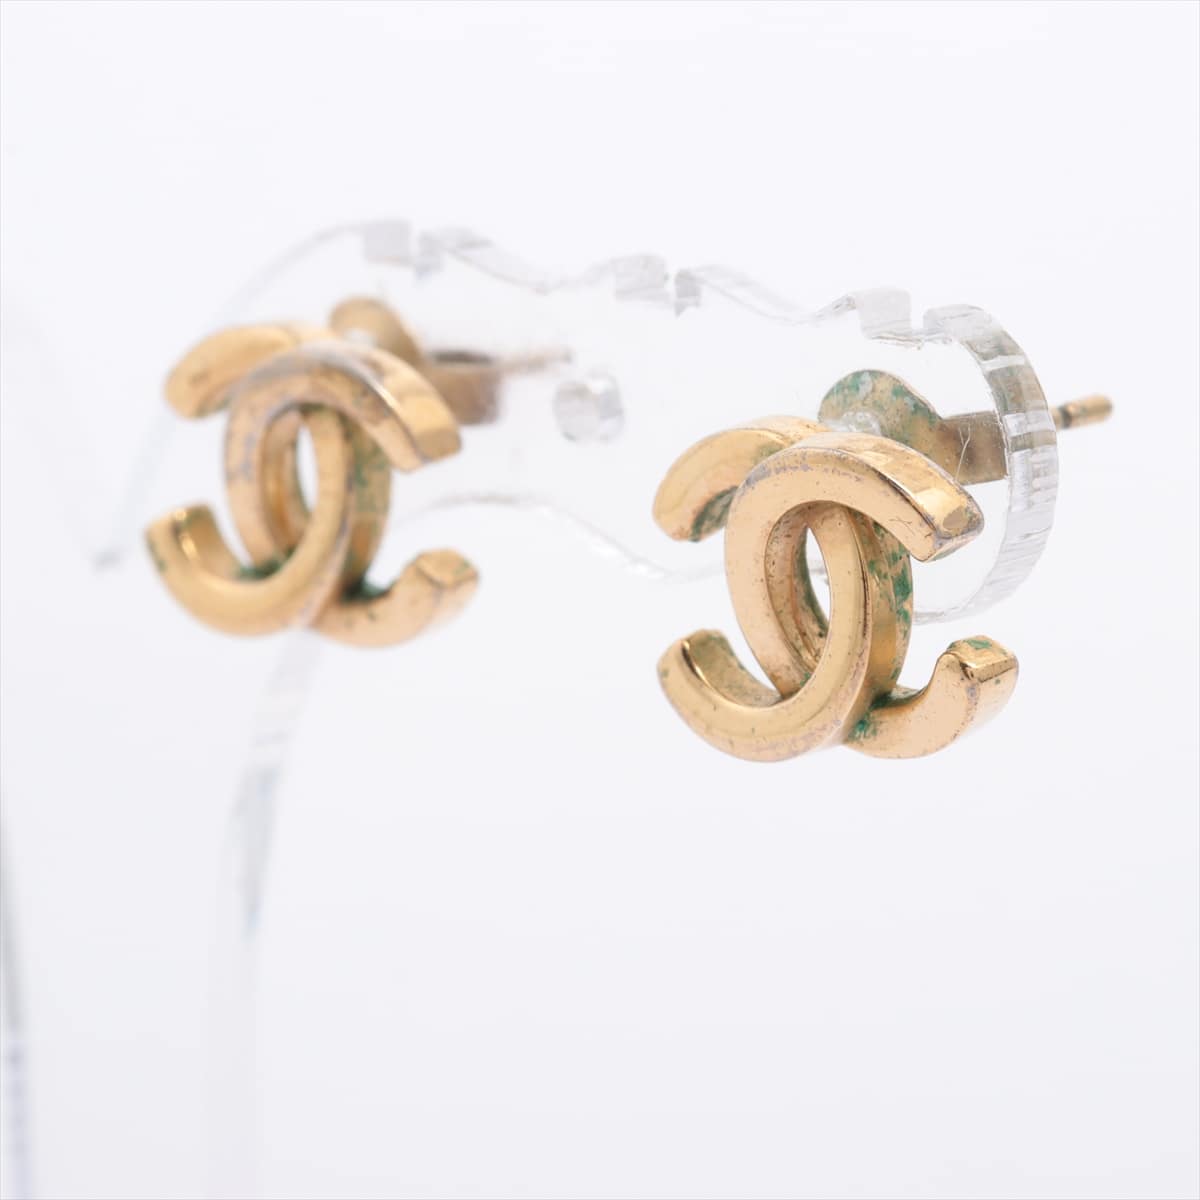 Chanel Coco Mark Piercing jewelry (for both ears) GP Gold